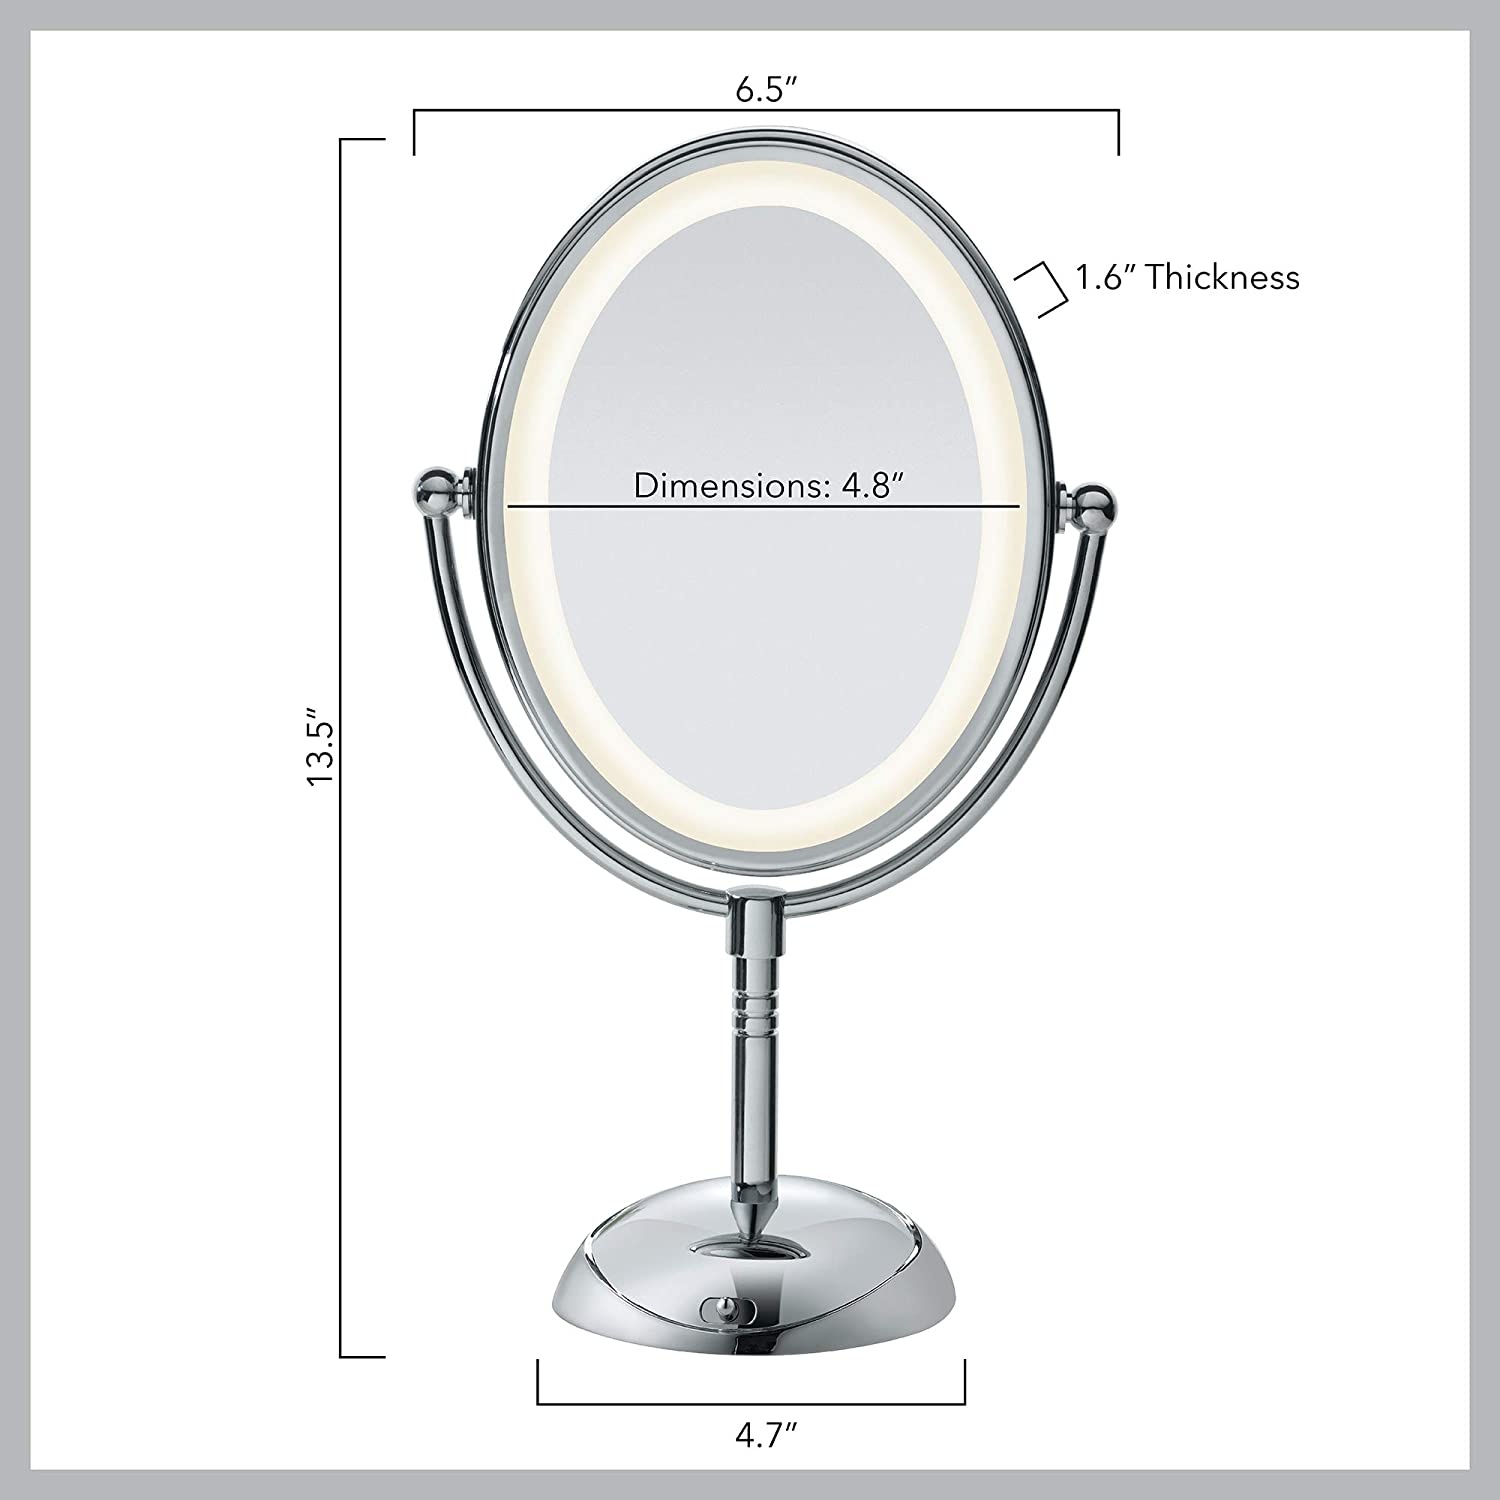 Conair Double-Sided Lighted Vanity Mirror with LED Lights, 1x/7x Magnification, Satin Nickel, BE157 - image 2 of 8